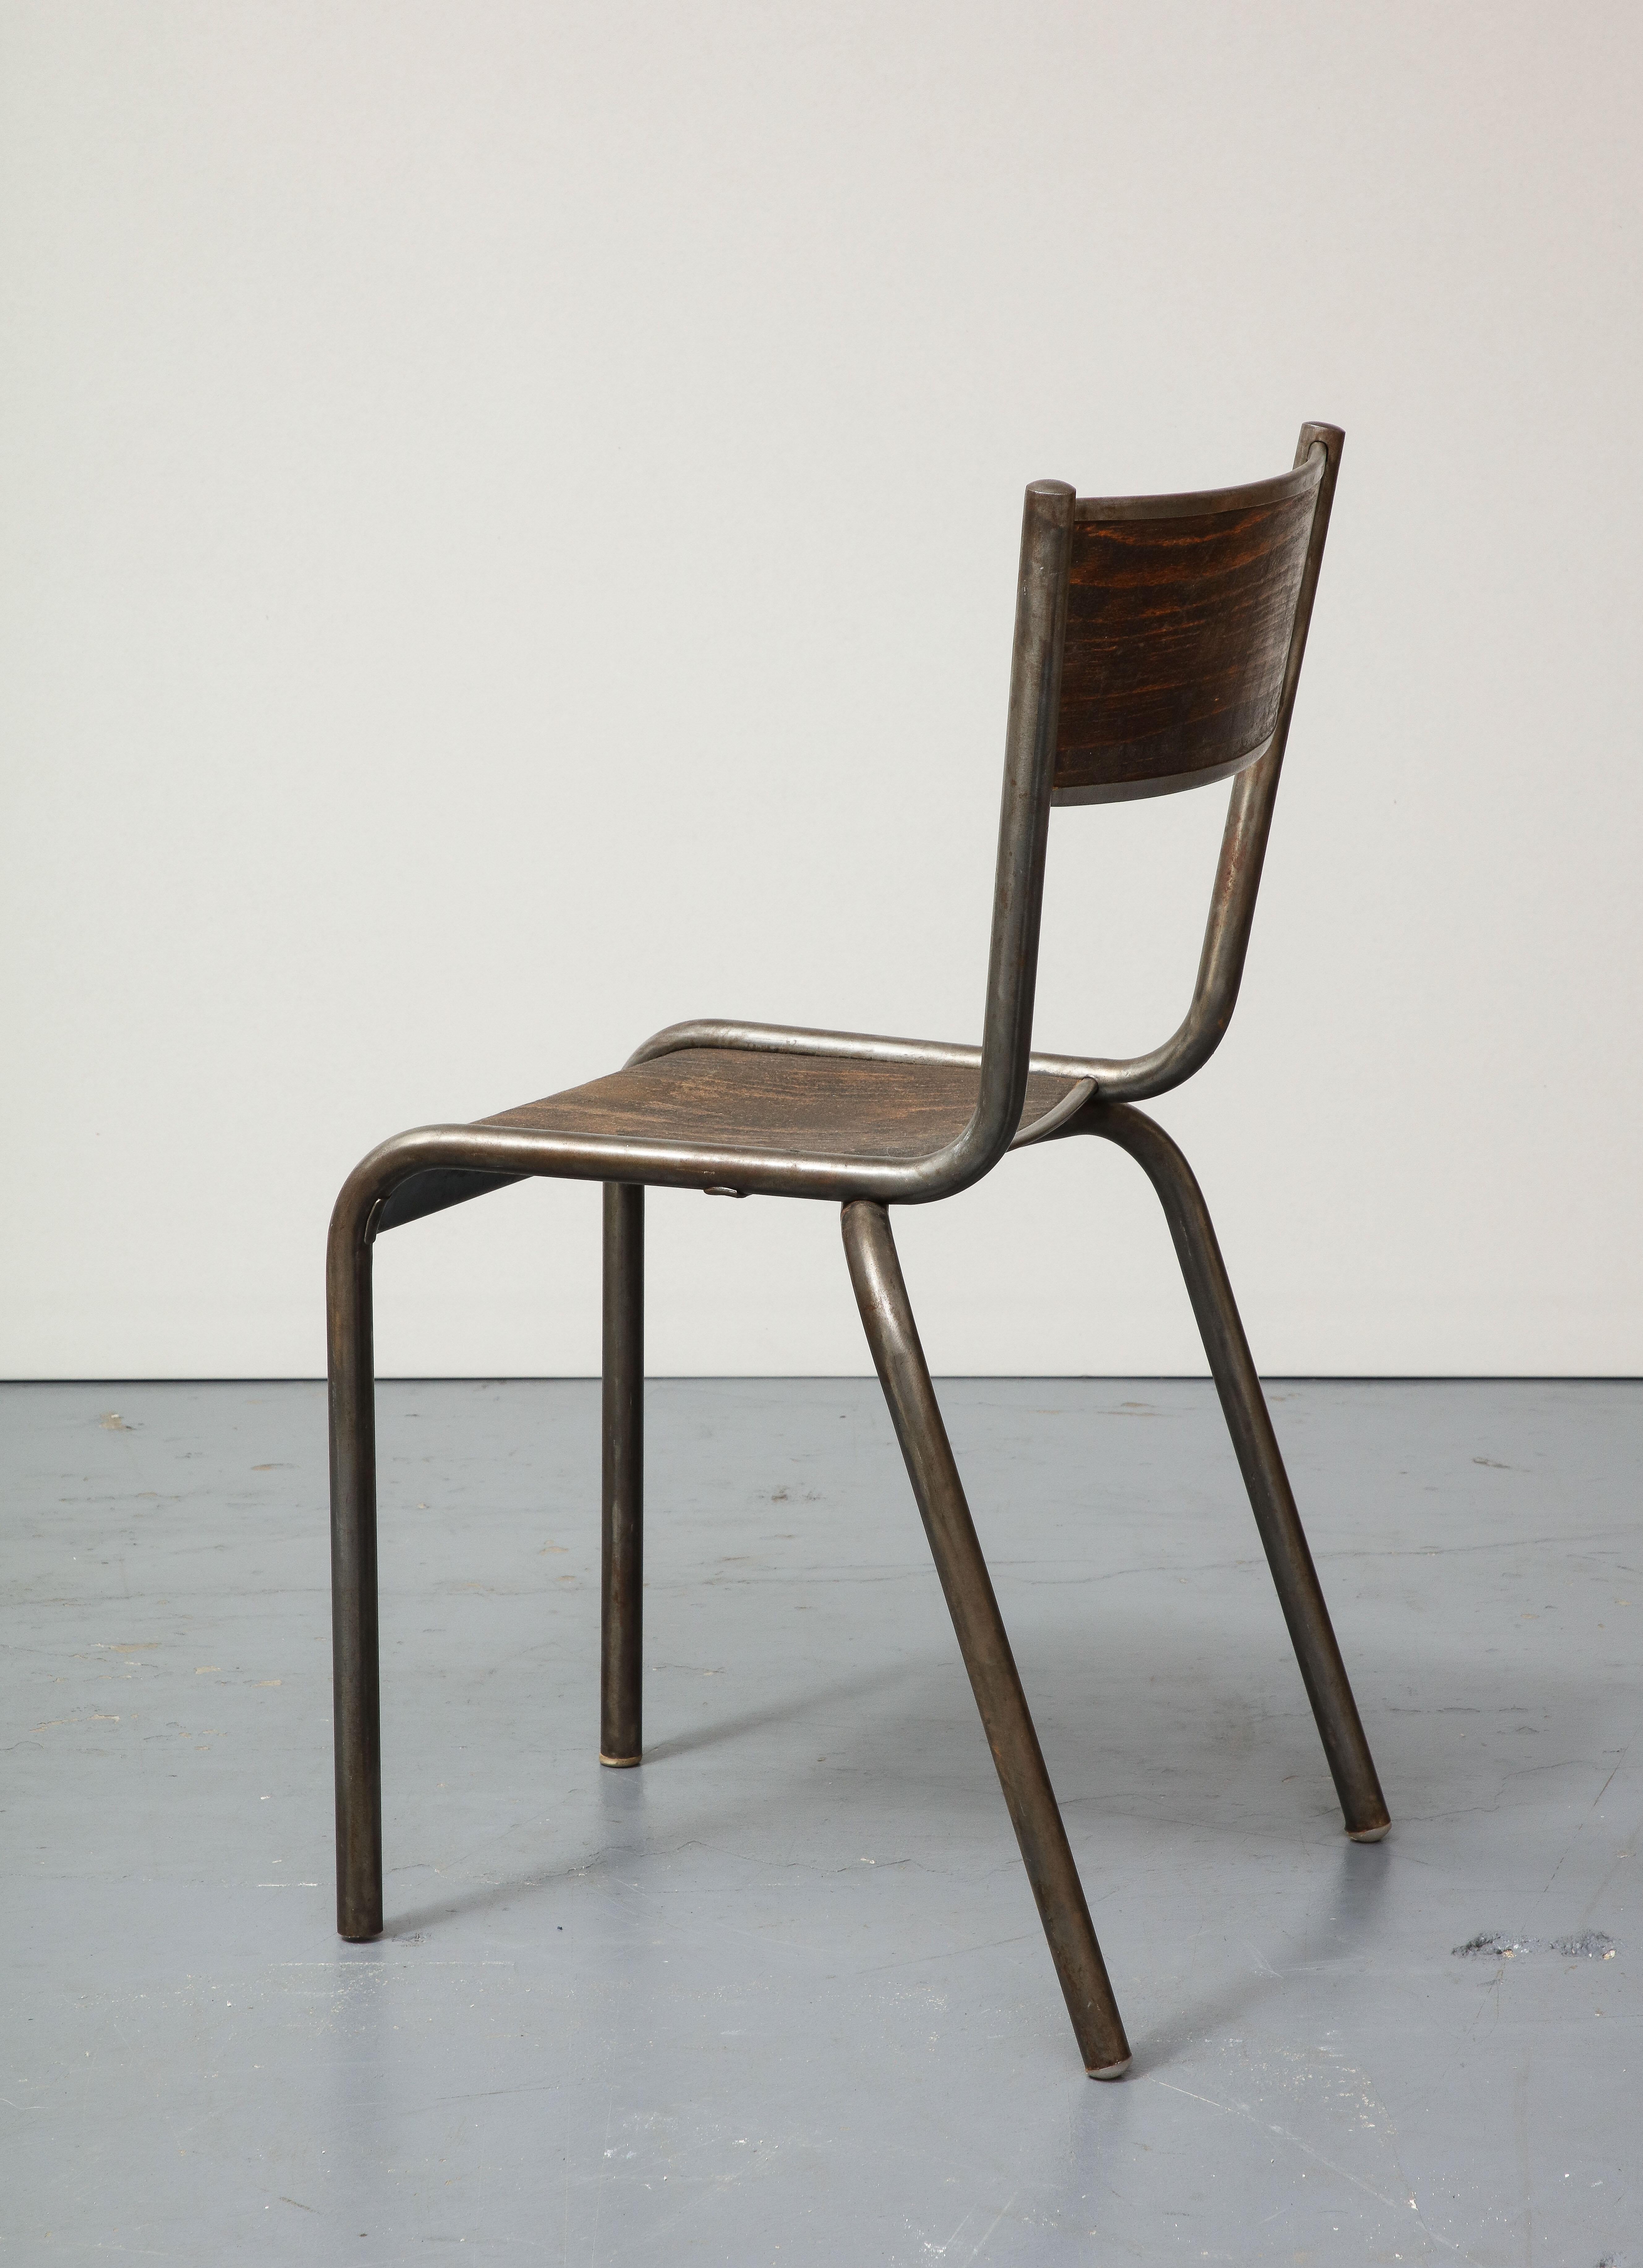 Polished Steel and Bentwood Chair, France, c. 1940 For Sale 5